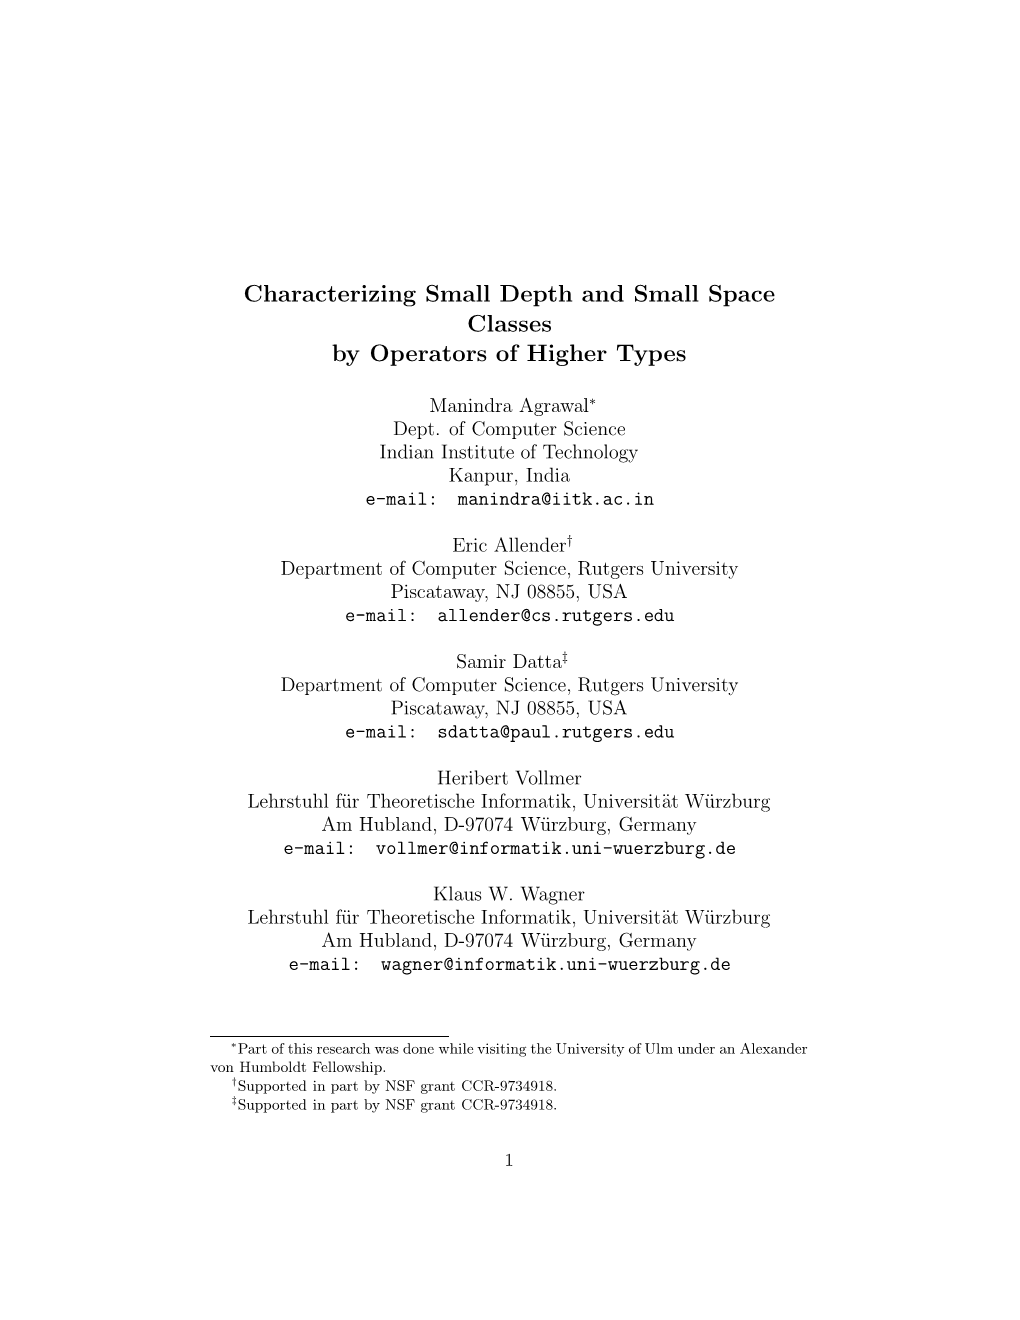 Characterizing Small Depth and Small Space Classes by Operators of Higher Types